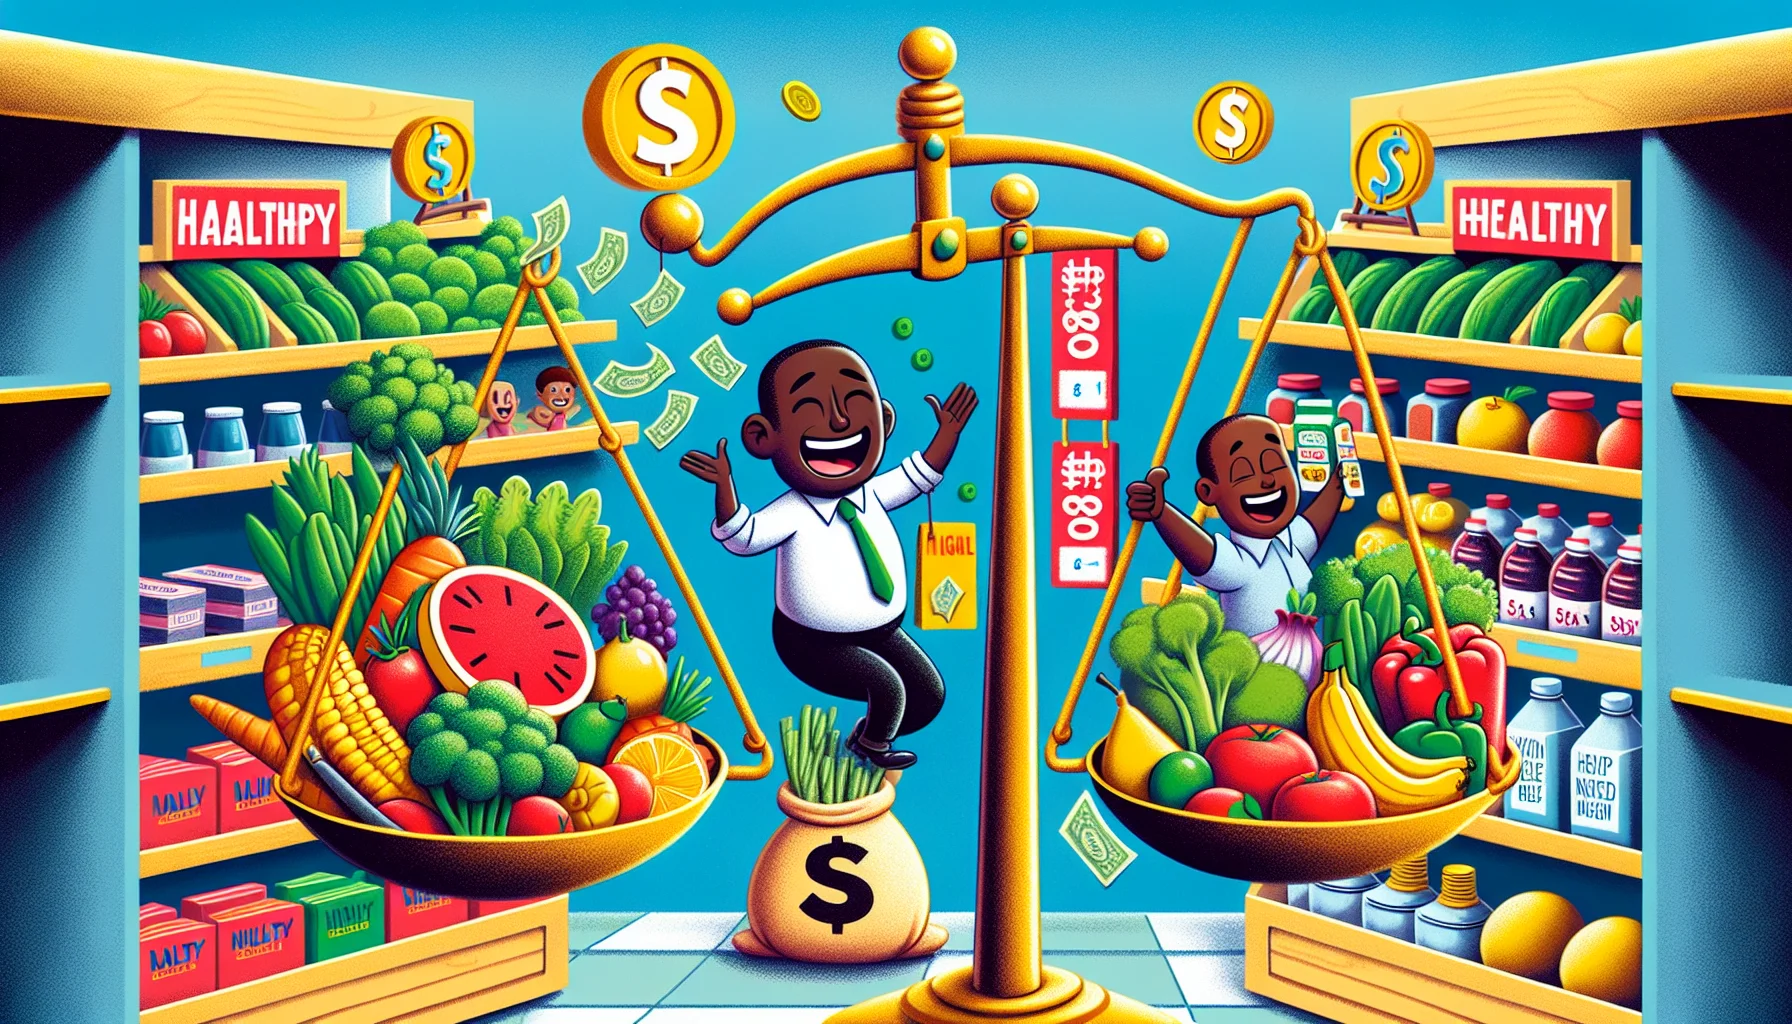 A humorous illustration showcasing the concept of Finding Your Personal Health Balance. The scene includes a balanced scale in the center that has various healthy foods such as fruits and vegetables on one side and a bag of money on the other side. Additionally, a happy cartoon character, a Caucasian male, is choosing the side of healthy foods and another character, a Black female, is laughing while throwing inexpensive but nutritious goods into the scale. The background consists of a vibrant supermarket aisle filled with healthy food options, all clearly marked with affordable prices.